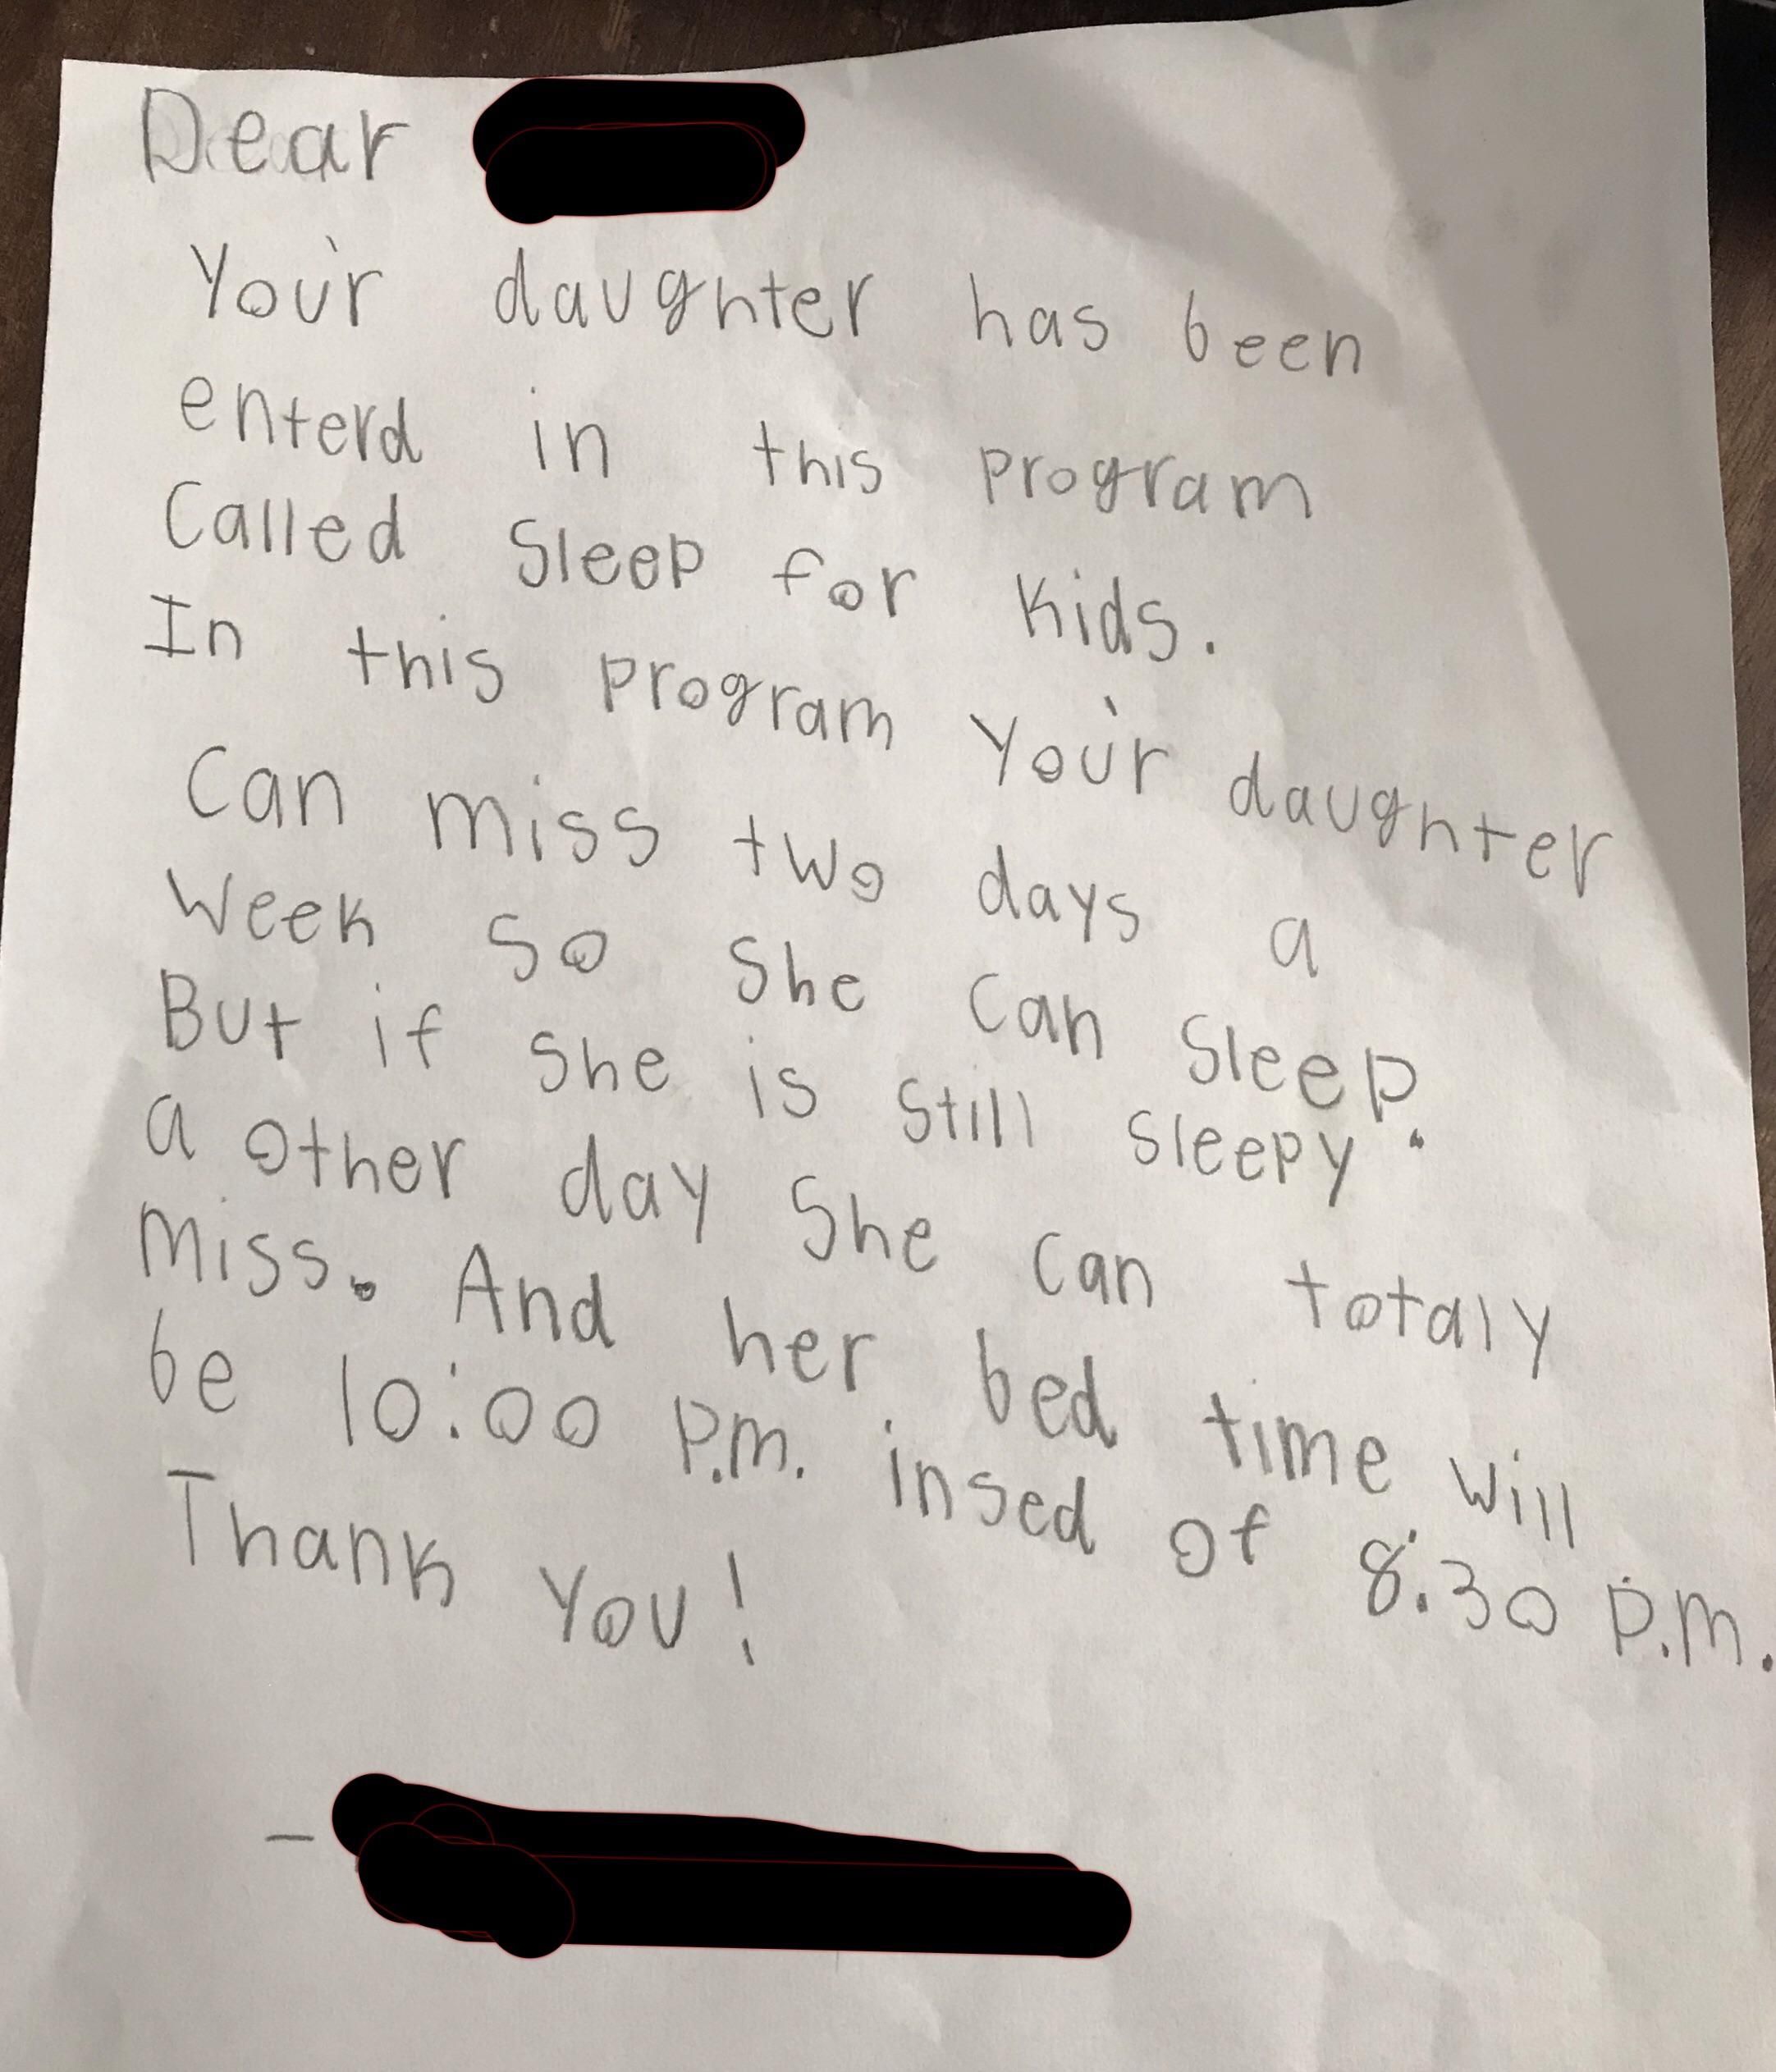 My daughter gave me this letter yesterday after school and said it was from her teacher.